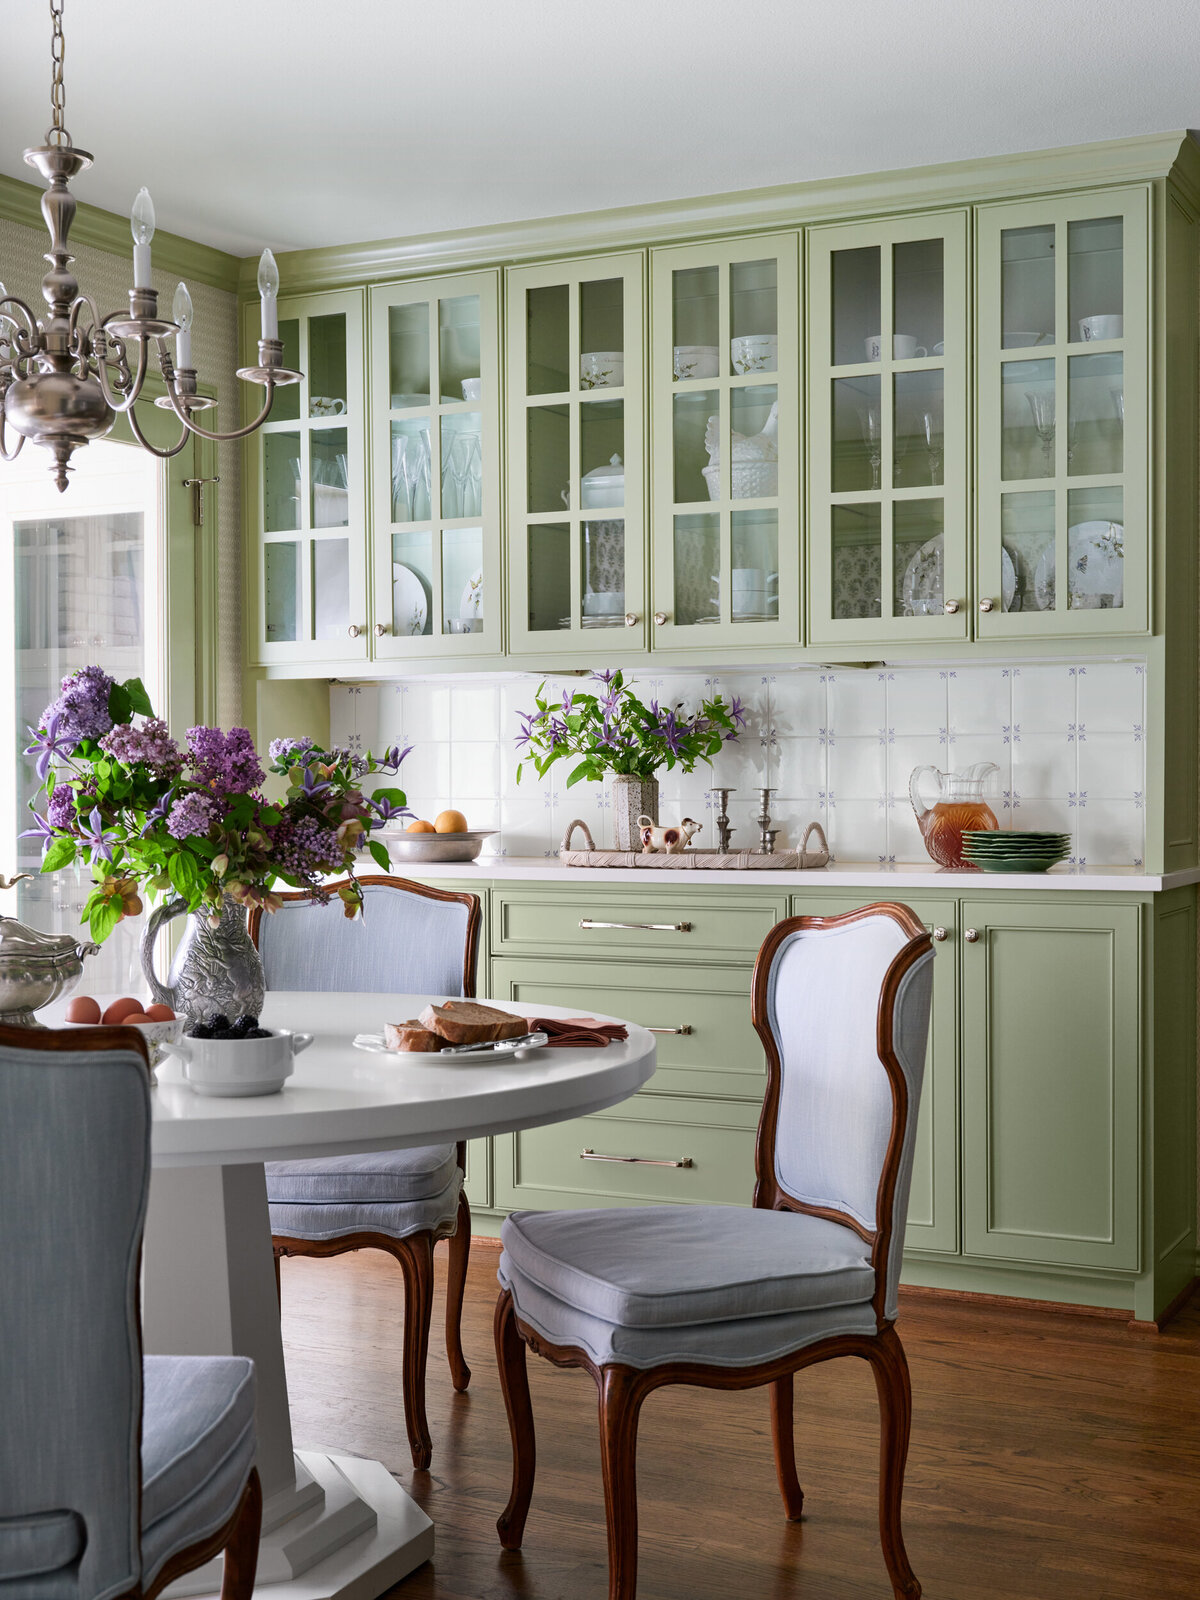 Green Cabinets, Breakfast Chairs and Table